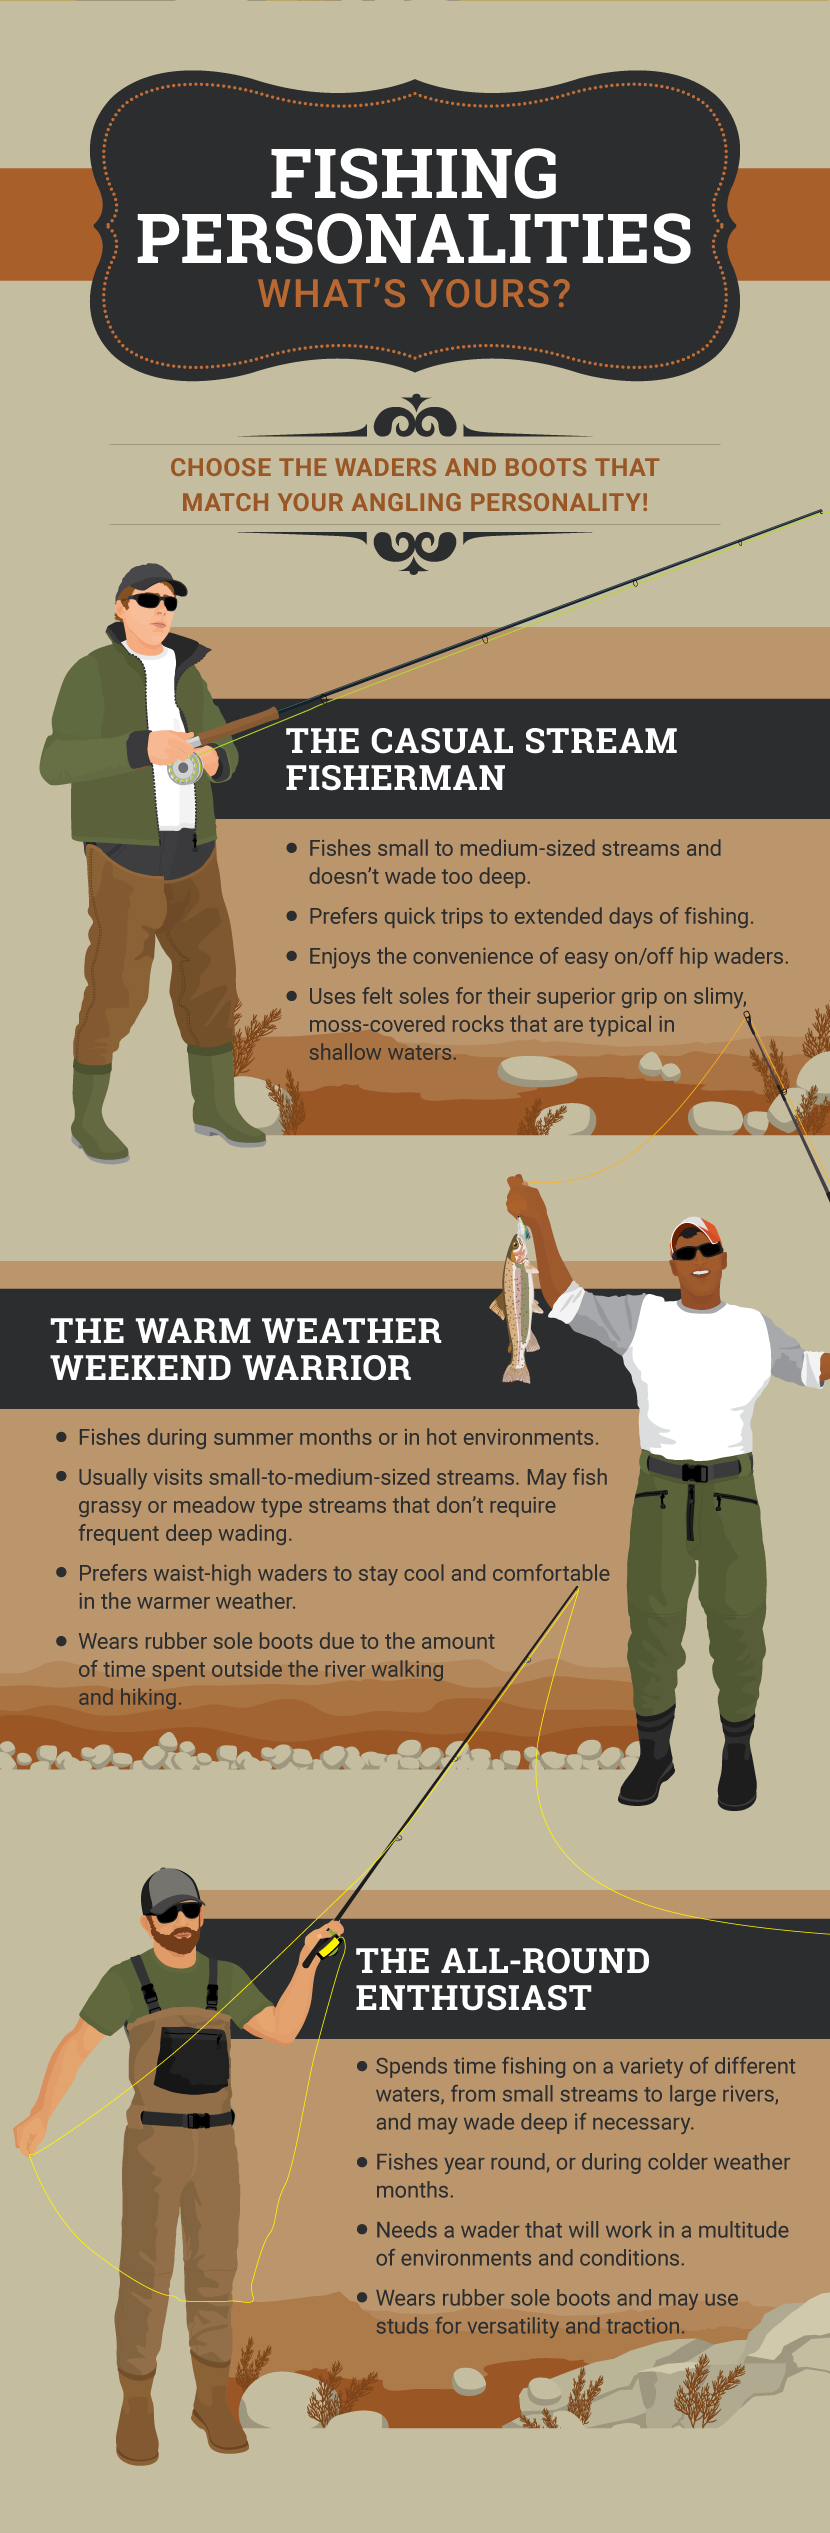 Fishing Personality - A Guide to Choosing the Right Fishing Waders